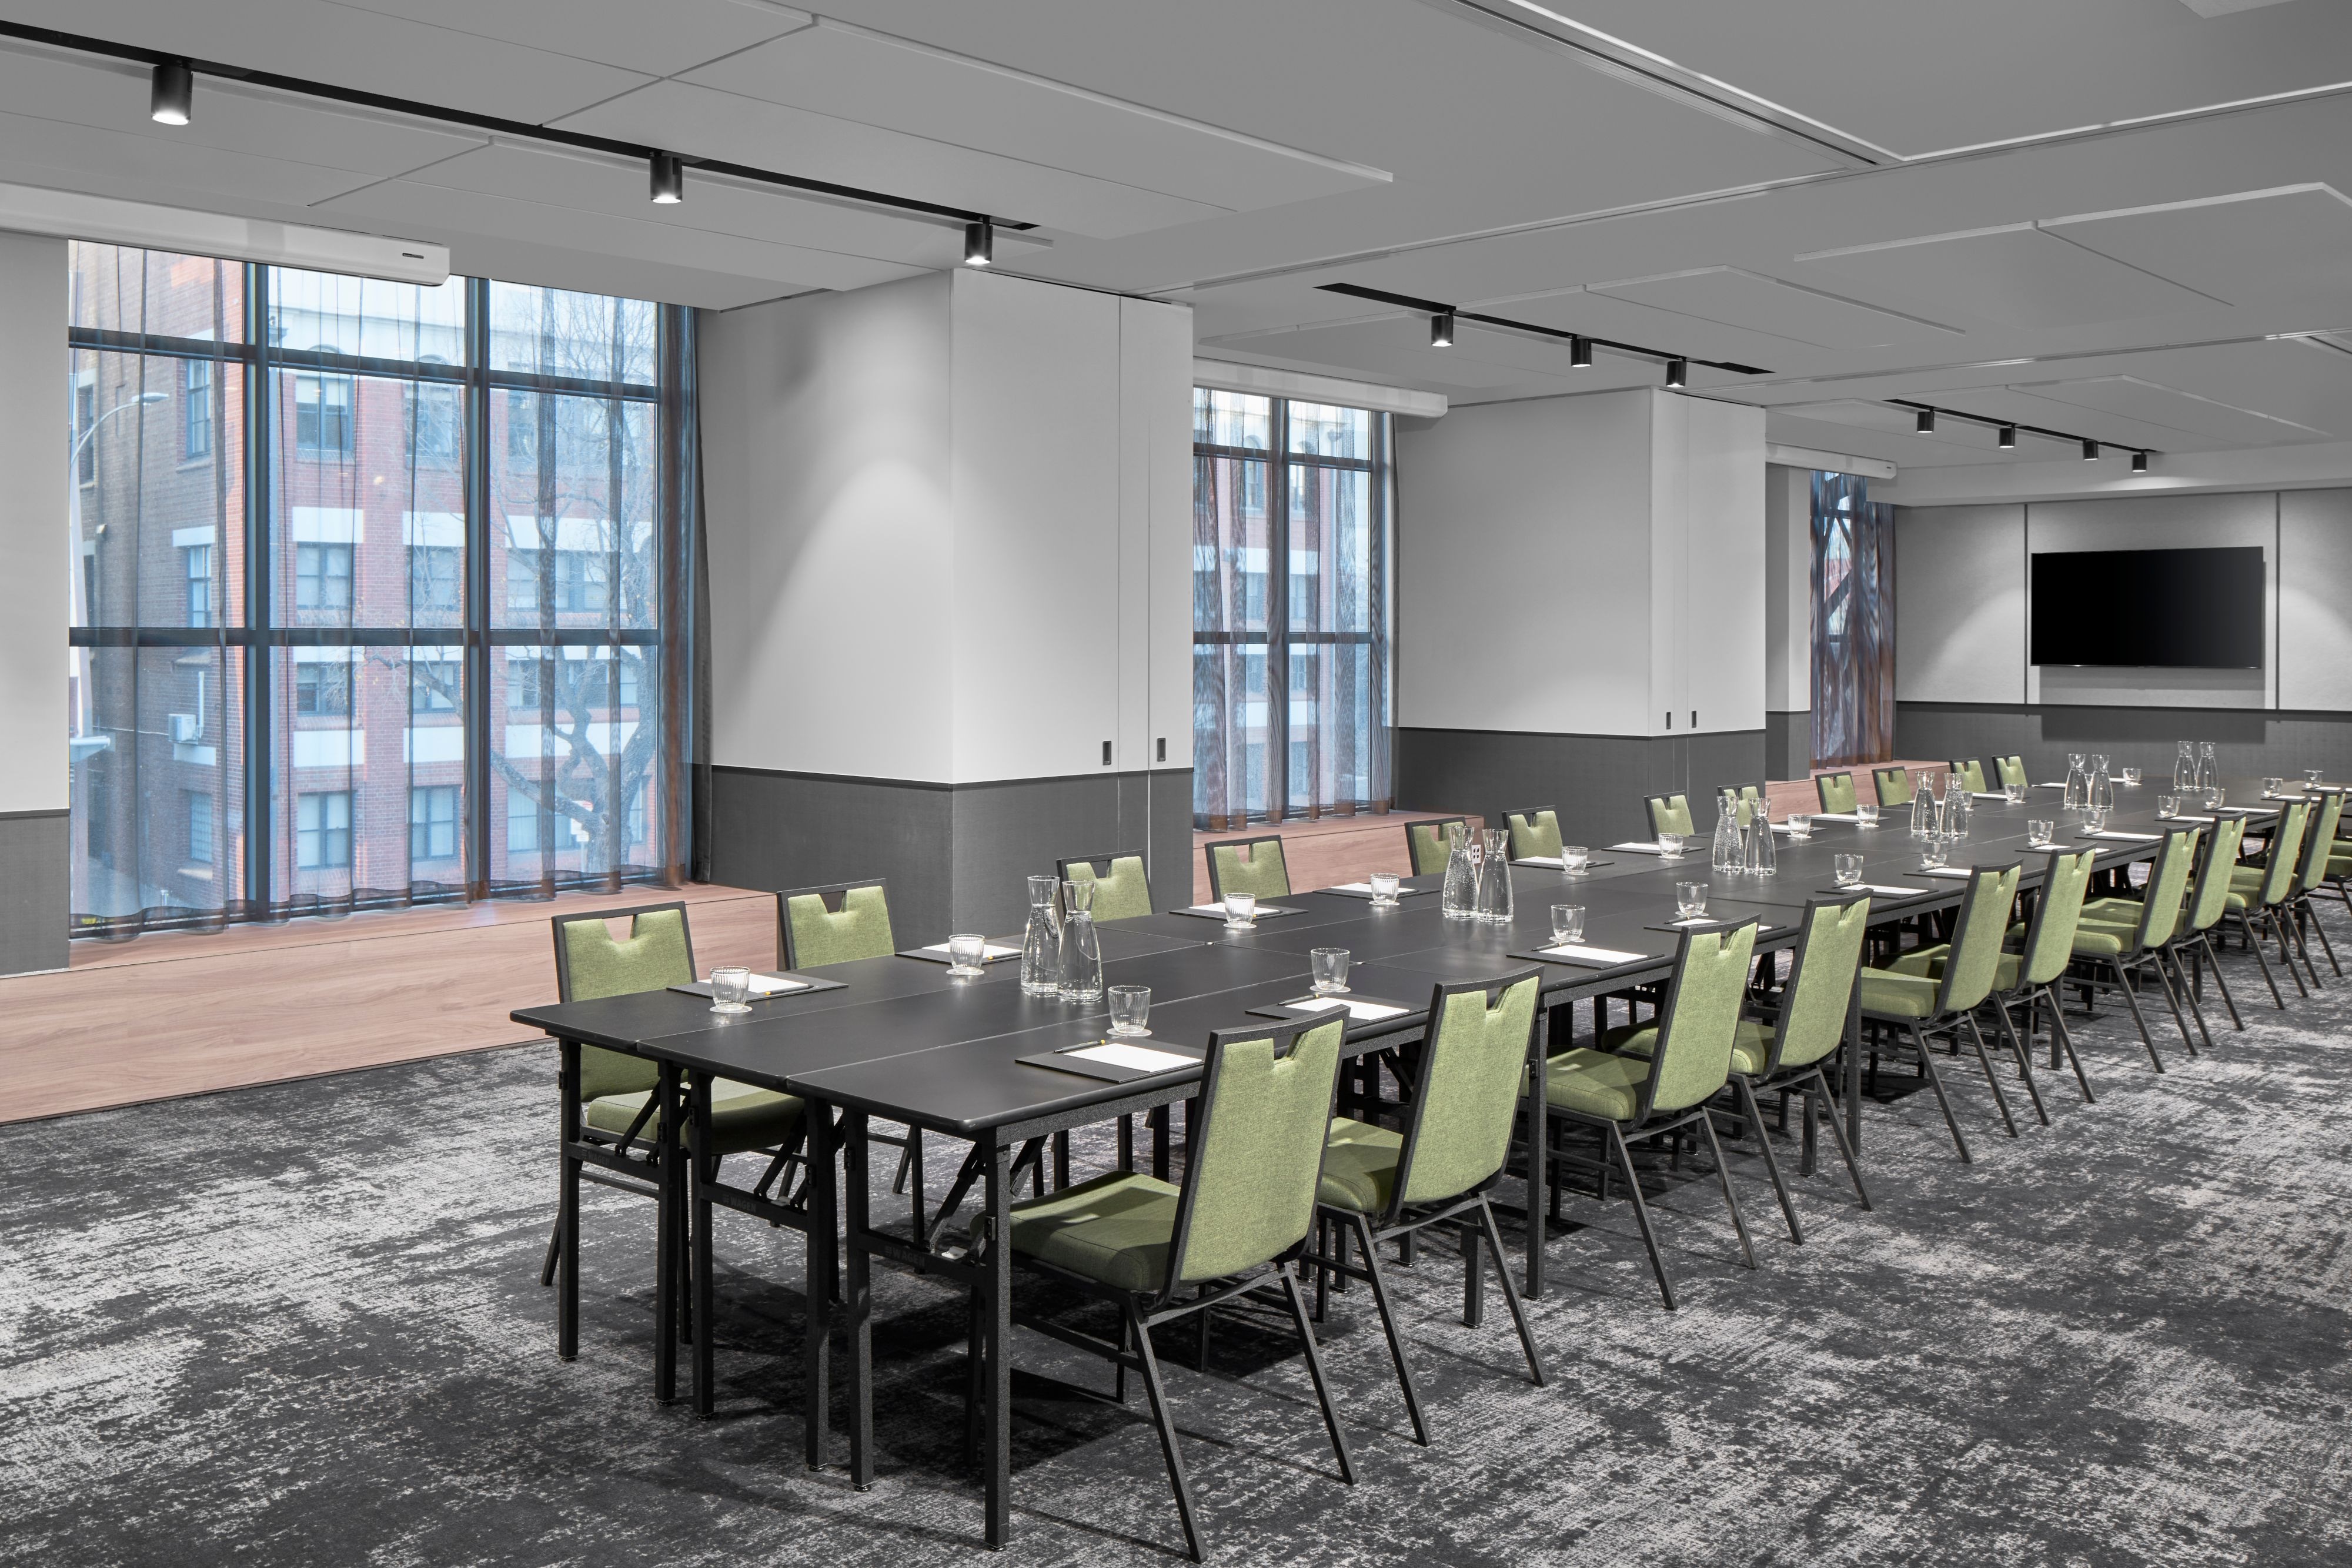 Meeting room with large windows and long table